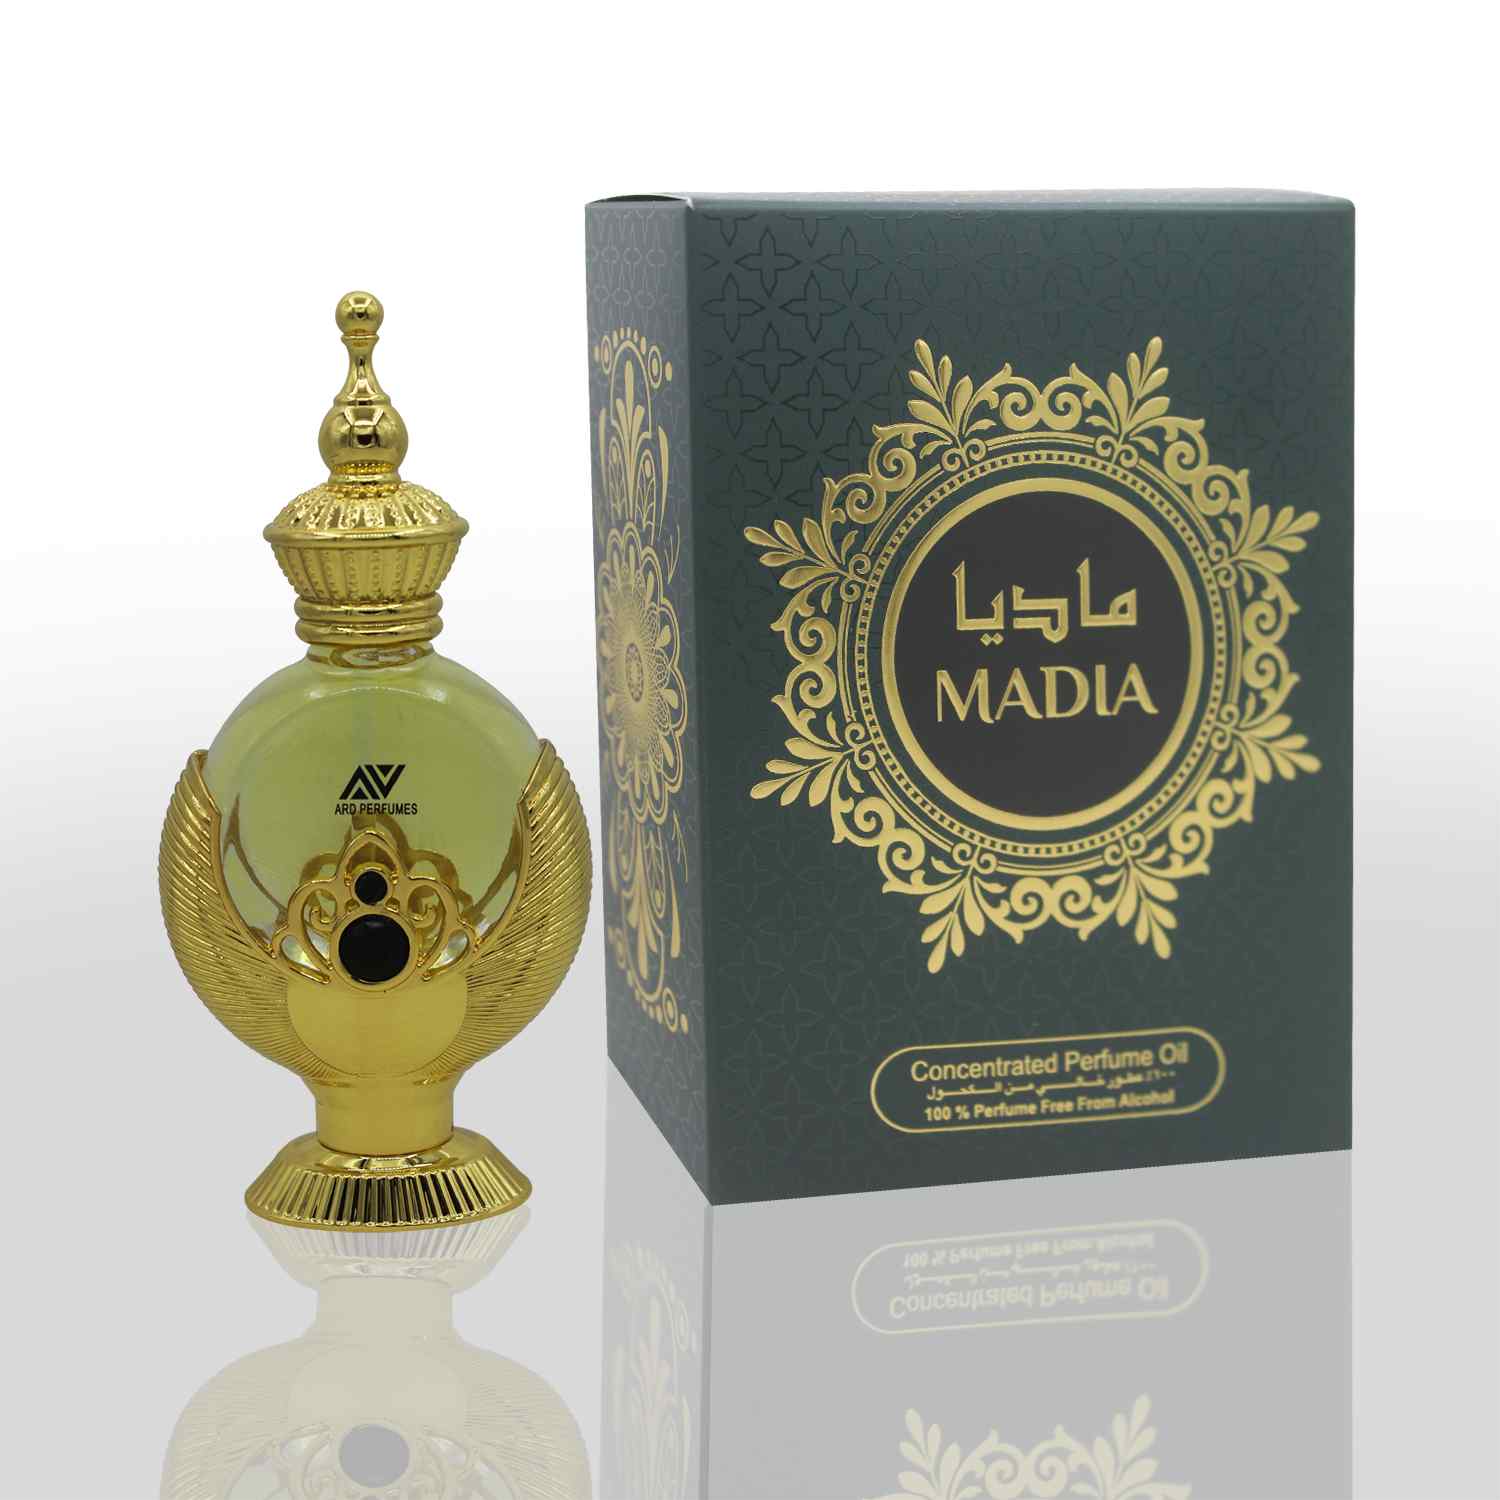 Madia Attar of ARD PERFUMES made in UAE